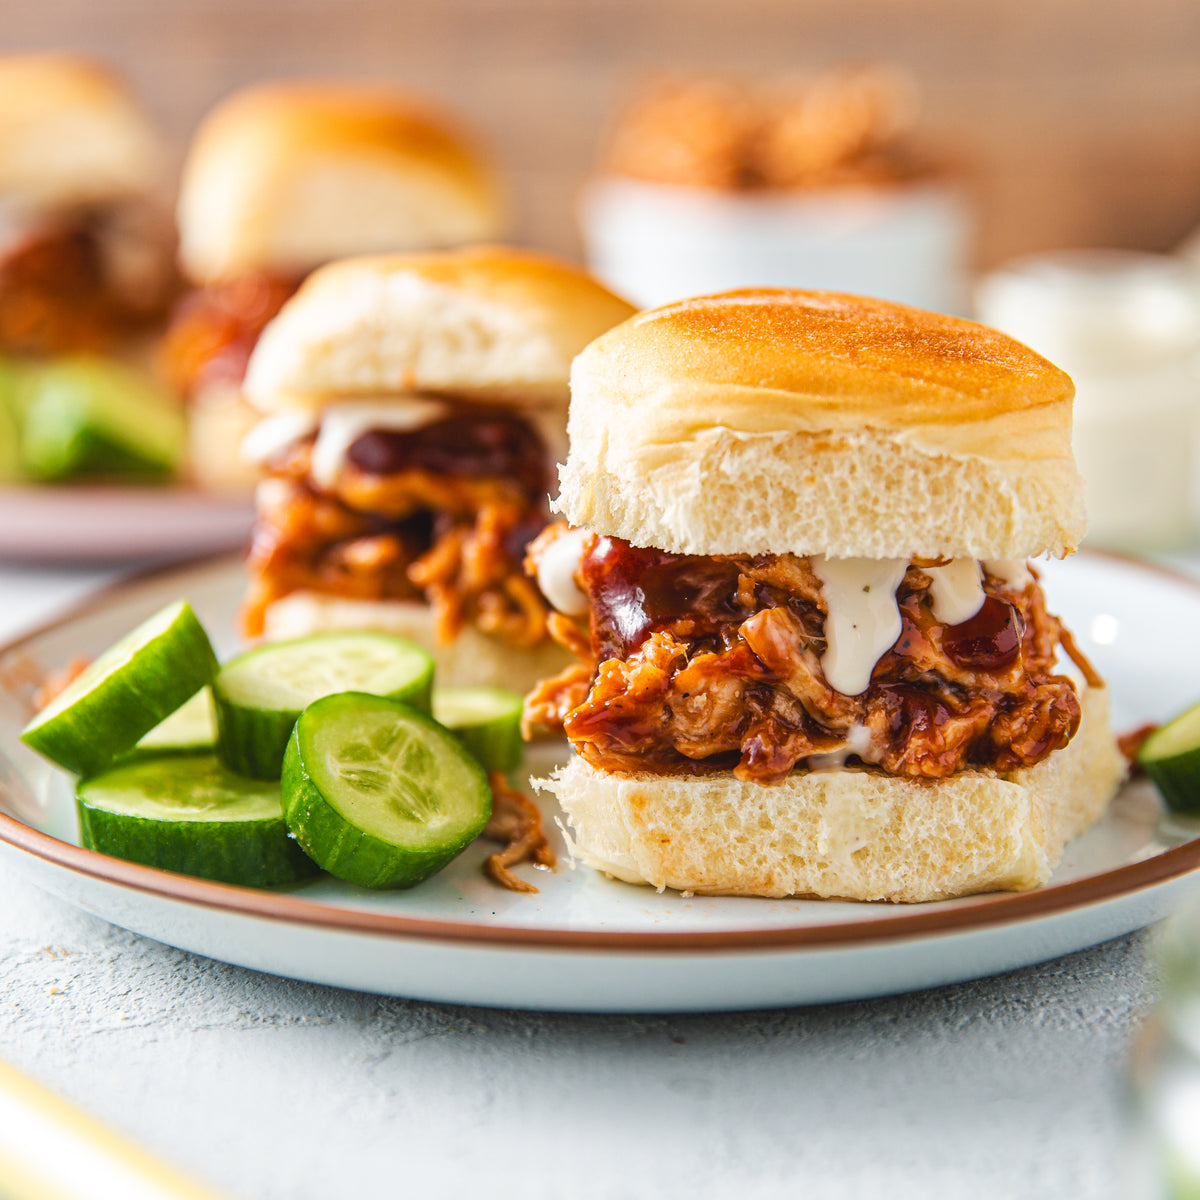 Kids' Fave: BBQ Chicken Sliders for Two